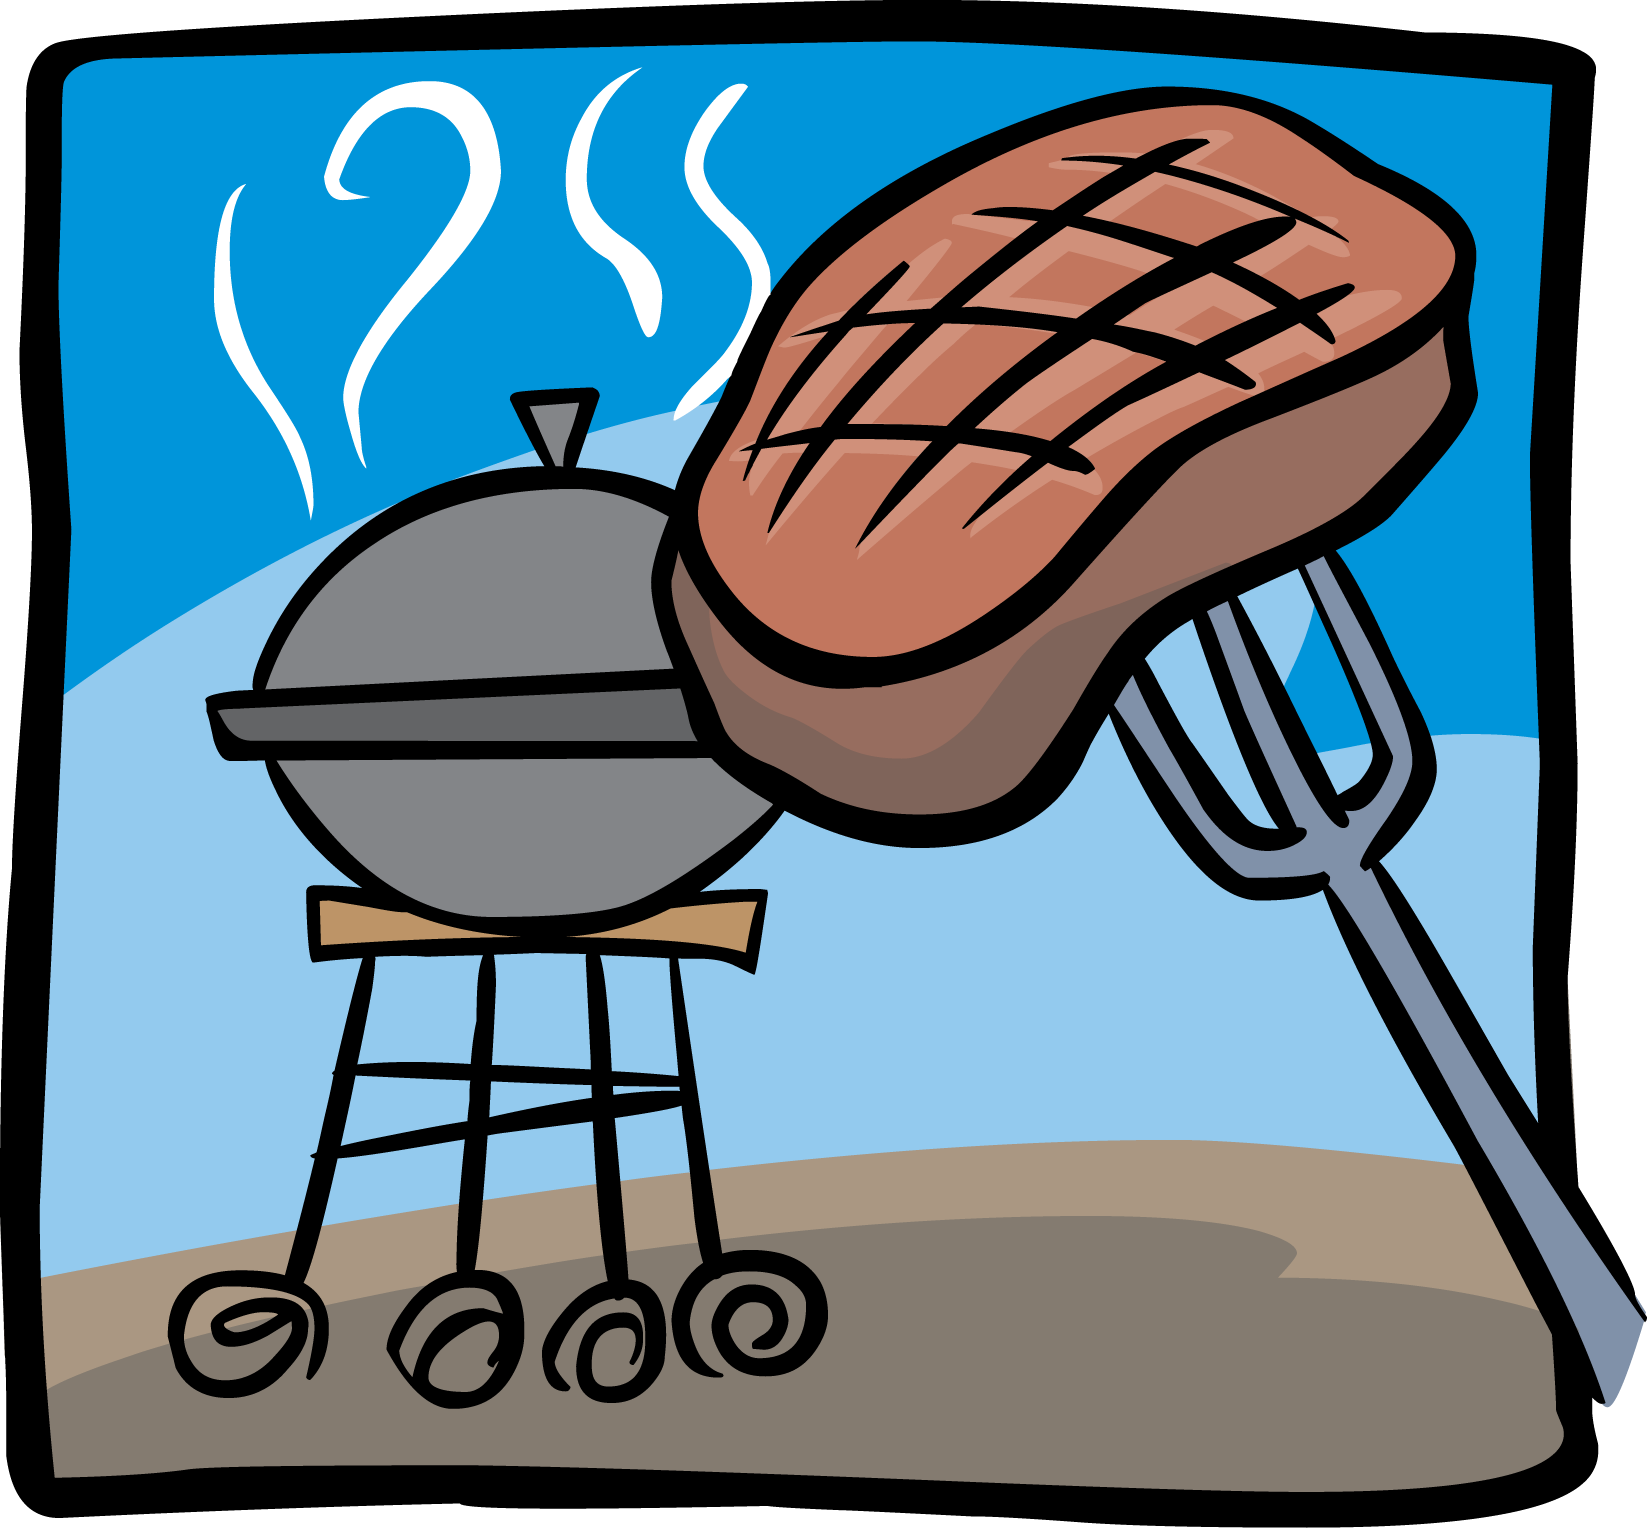 Barbeque Cartoon clipart image can be... 